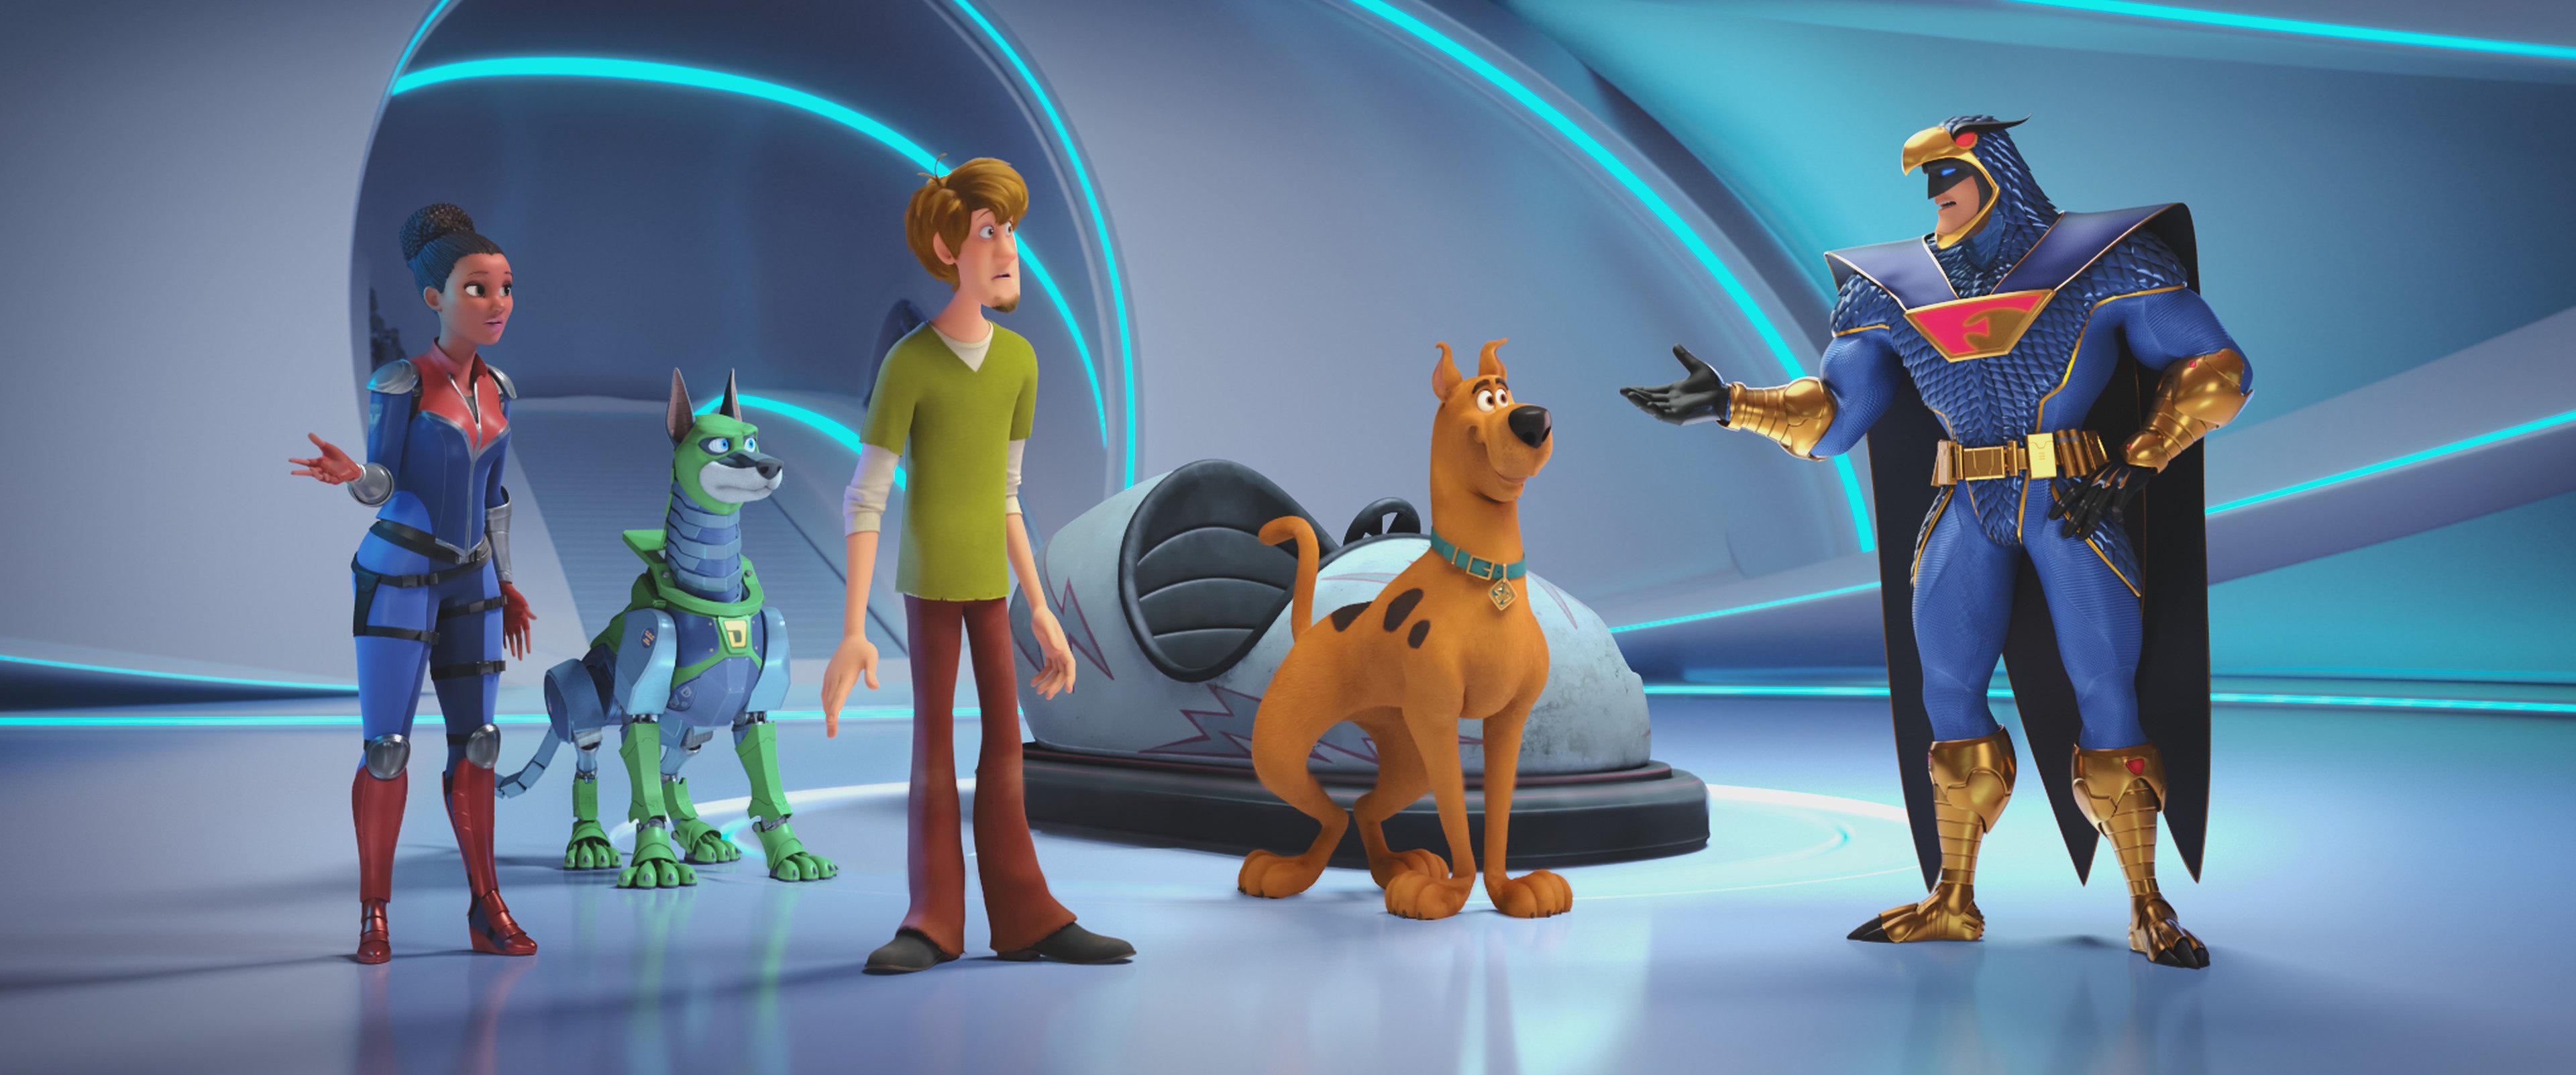 Scoob!' Originally Had Even More Hanna-Barbera Characters. Which Ones Join  Scooby-Doo In the Movie?